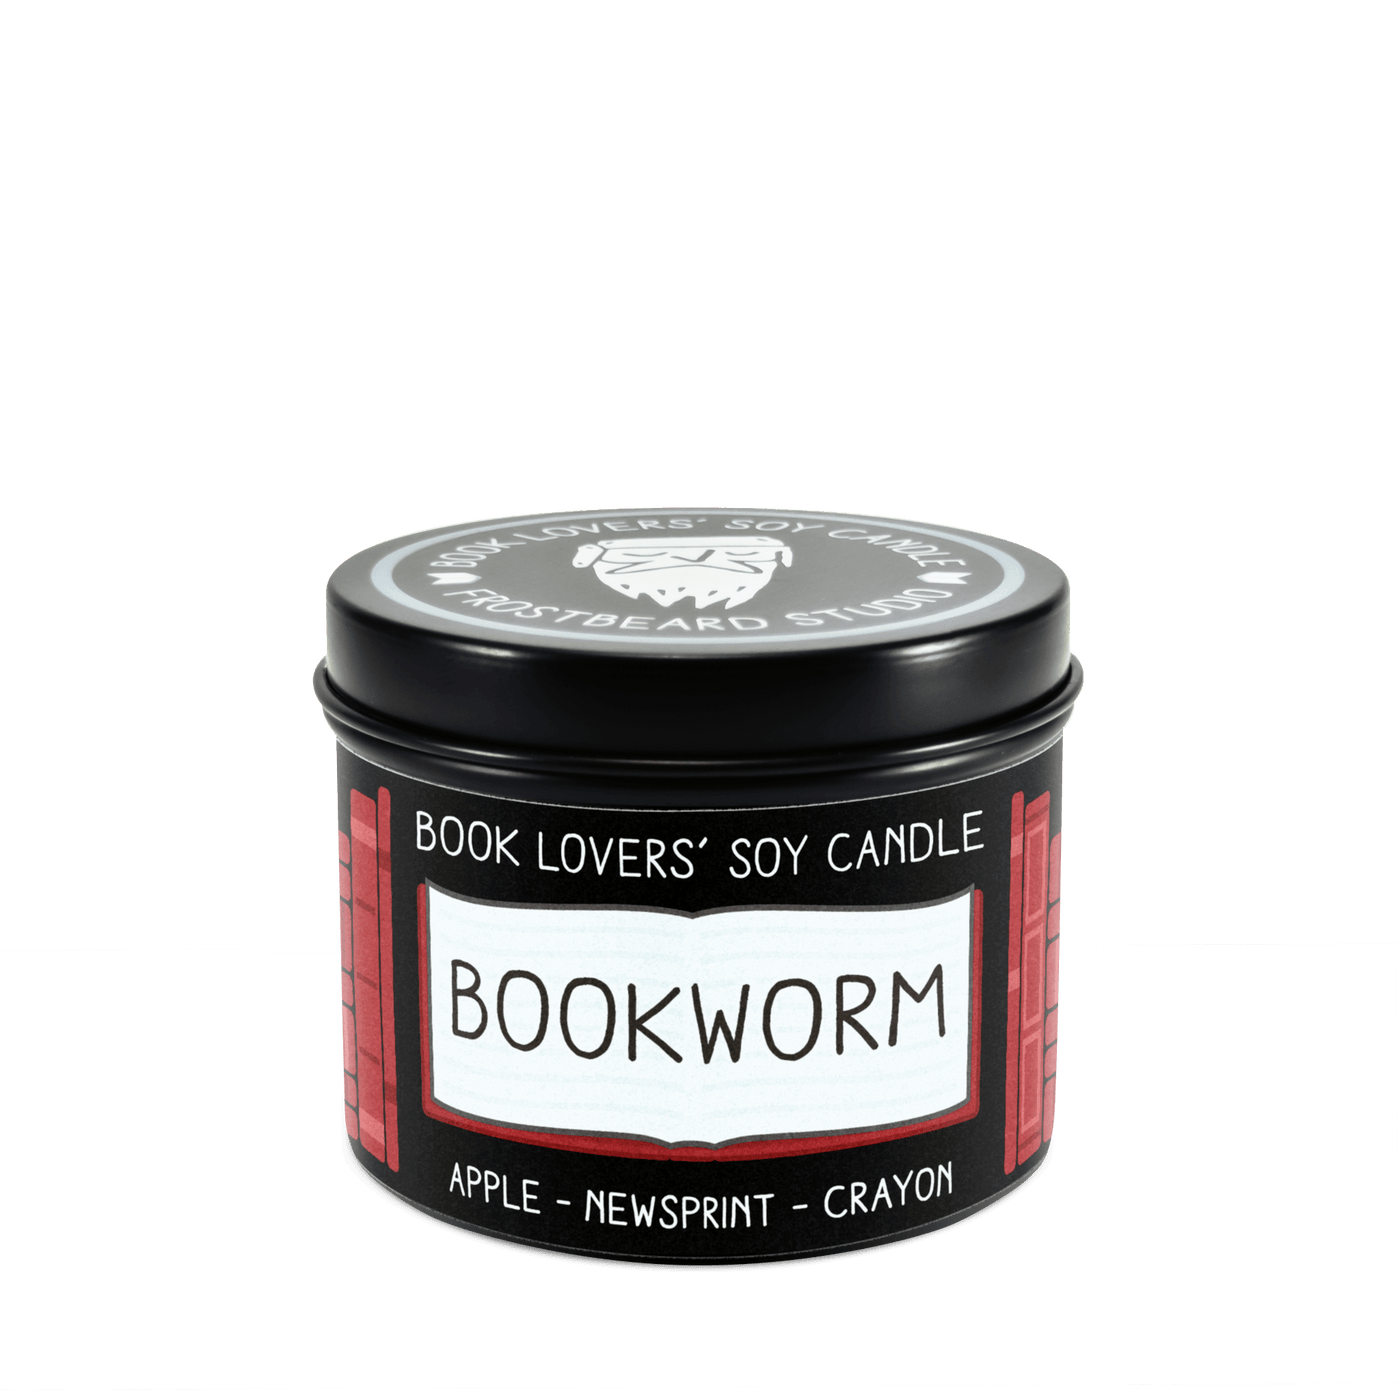 Bookworm  -  4 oz Tin  -  Book Lovers' Soy Candle  -  Frostbeard Studio